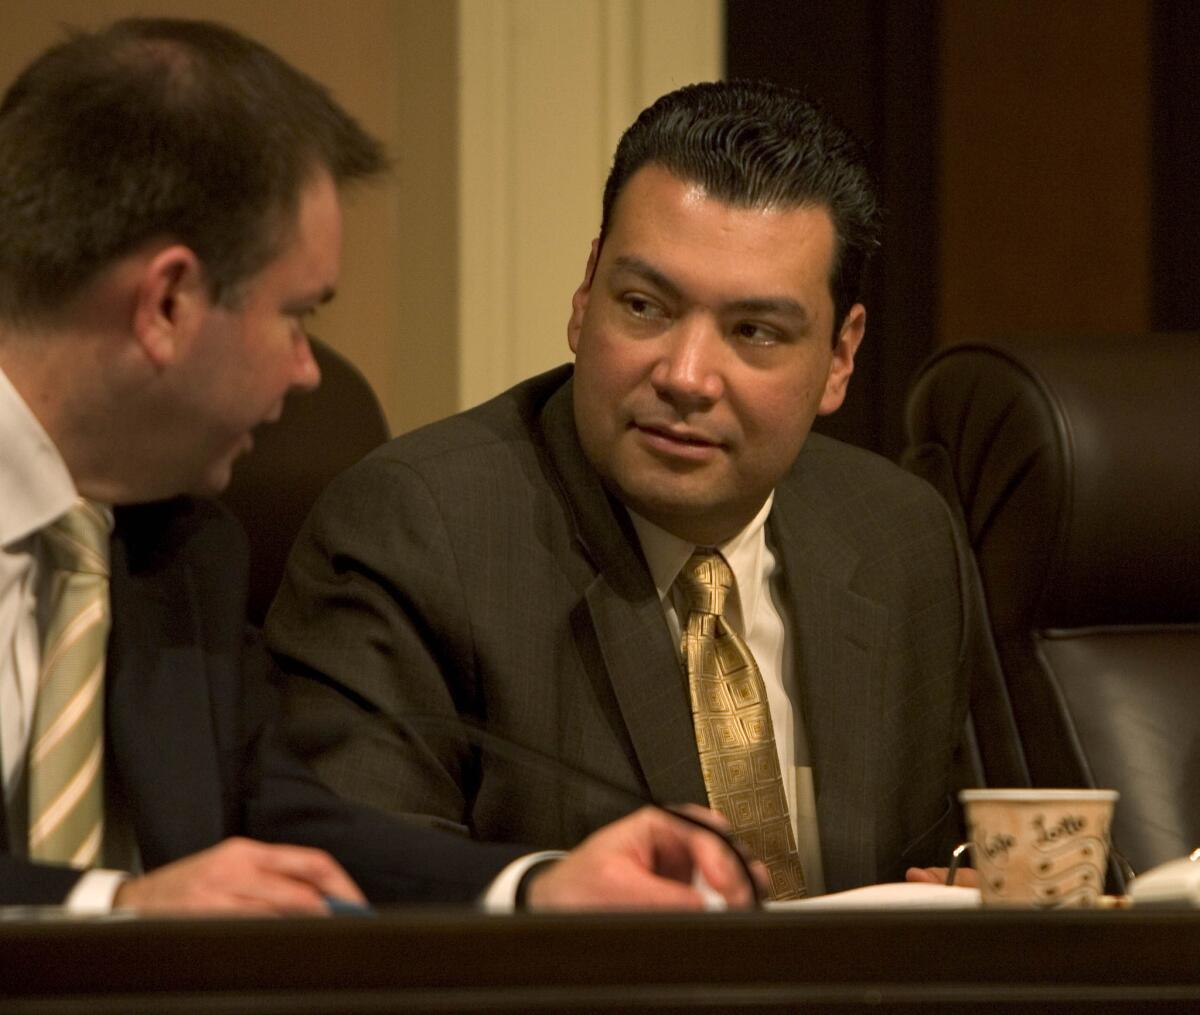 State Sen. Alex Padilla (D-Pacoima), shown above in 2007, on Thursday proposed four bills to restrict campaign fundraising and spending.